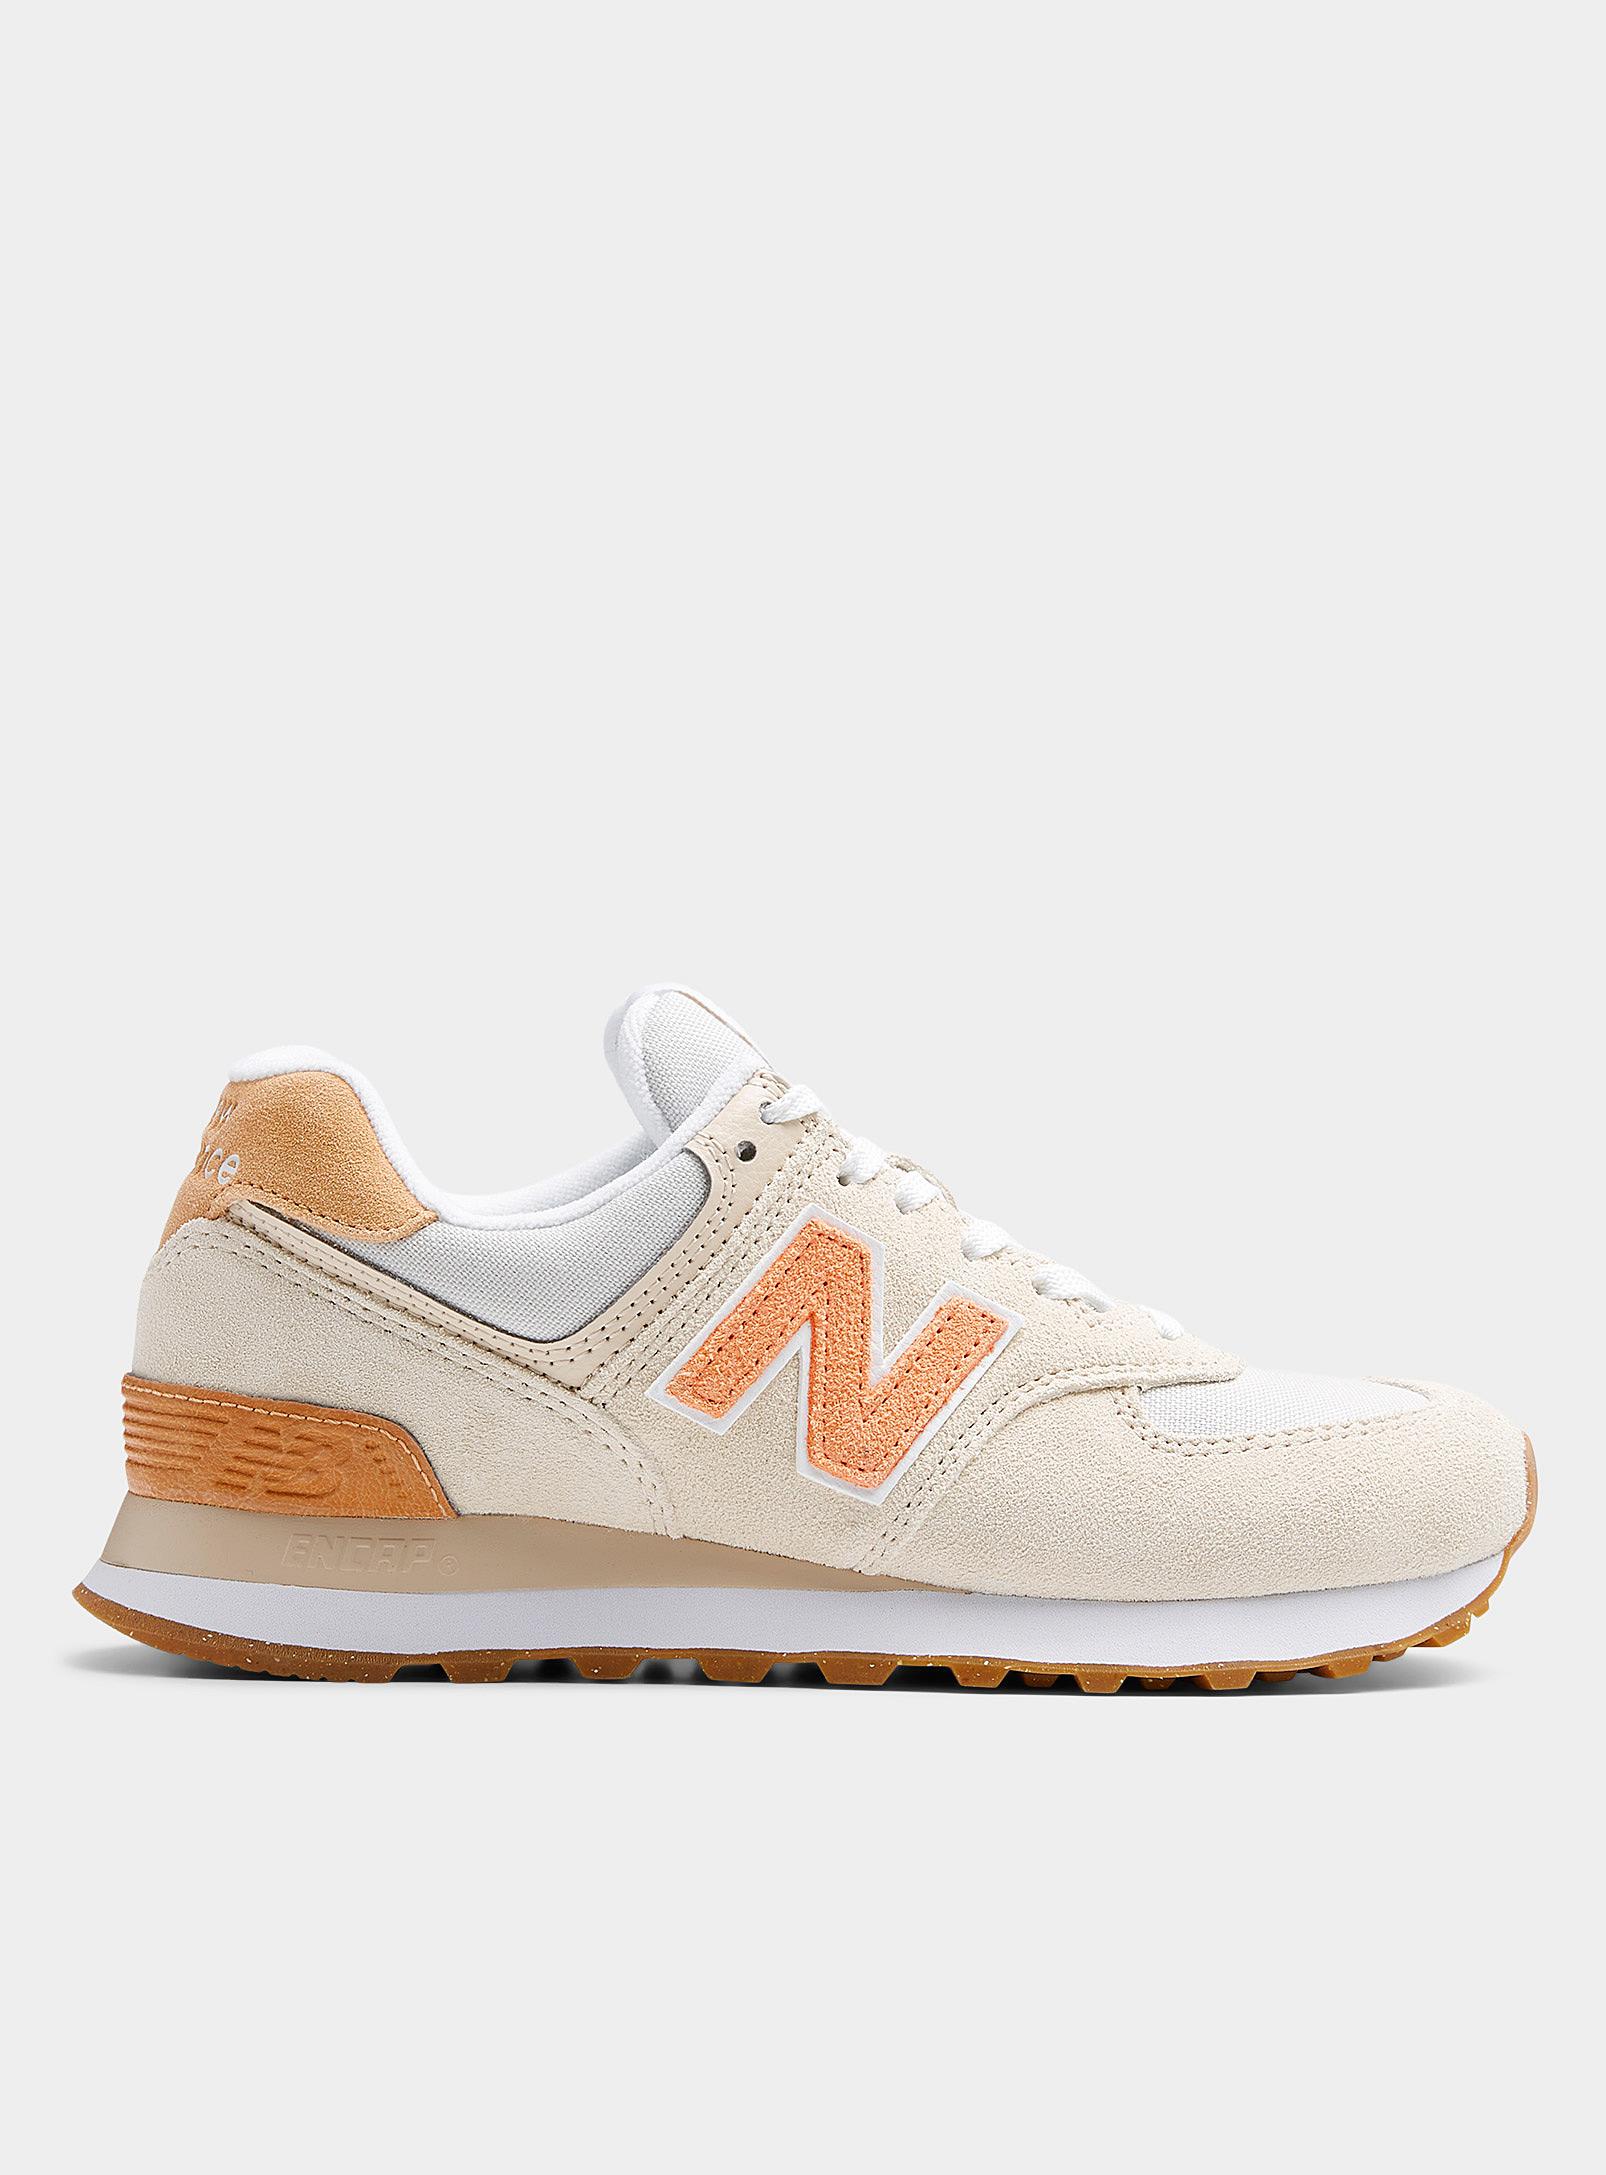 New Balance Suede Ivory And Peach 574 Sneaker Women in Cream Beige  (Natural) | Lyst